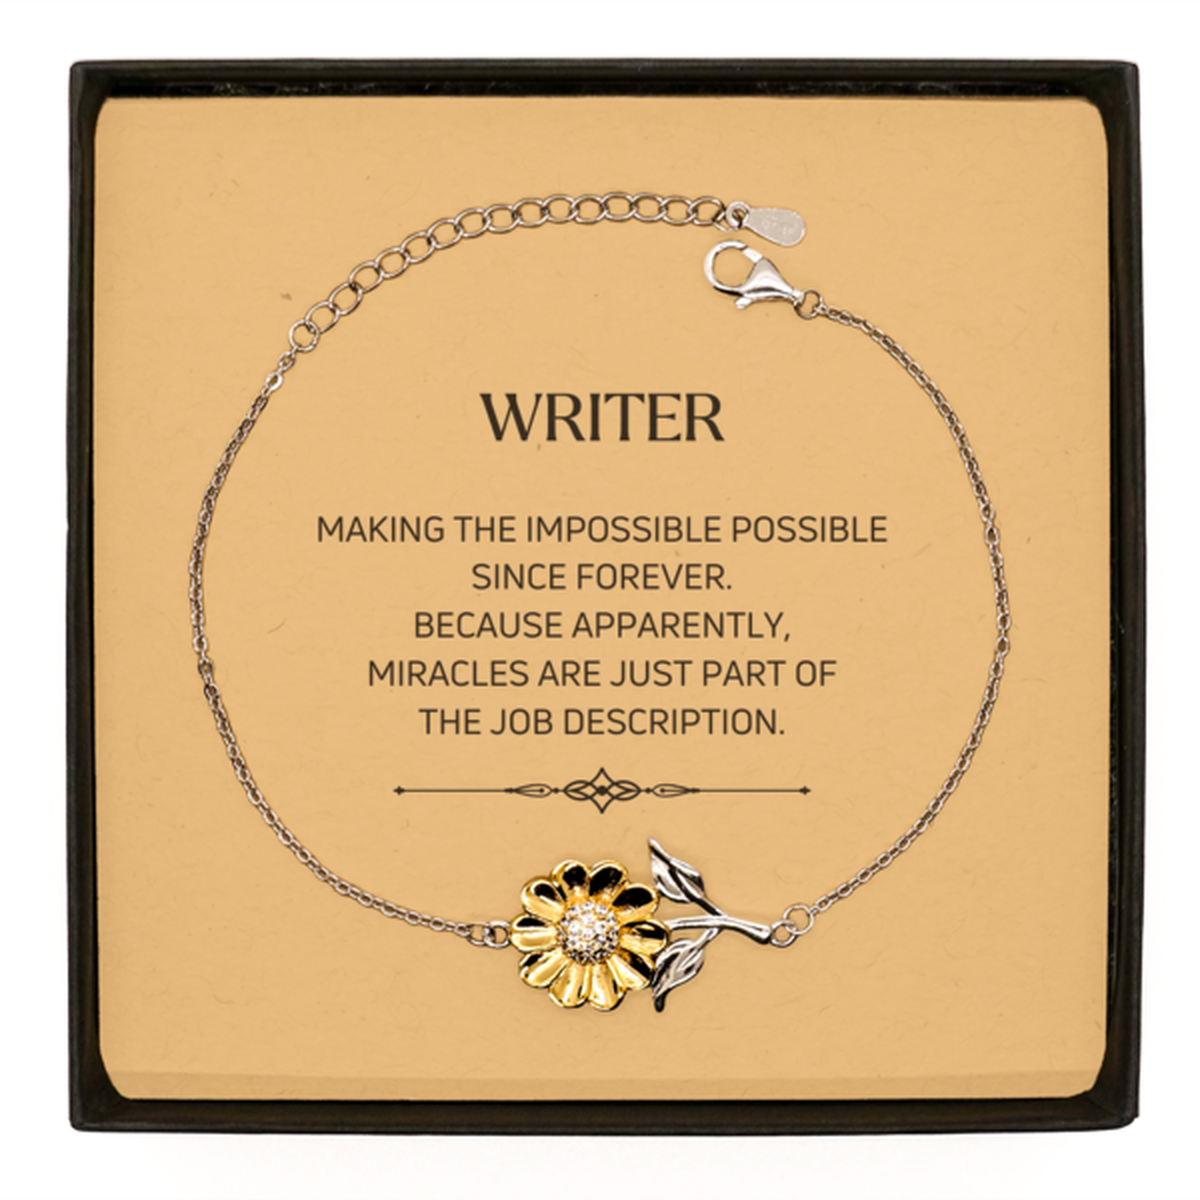 Funny Writer Gifts, Miracles are just part of the job description, Inspirational Birthday Sunflower Bracelet For Writer, Men, Women, Coworkers, Friends, Boss